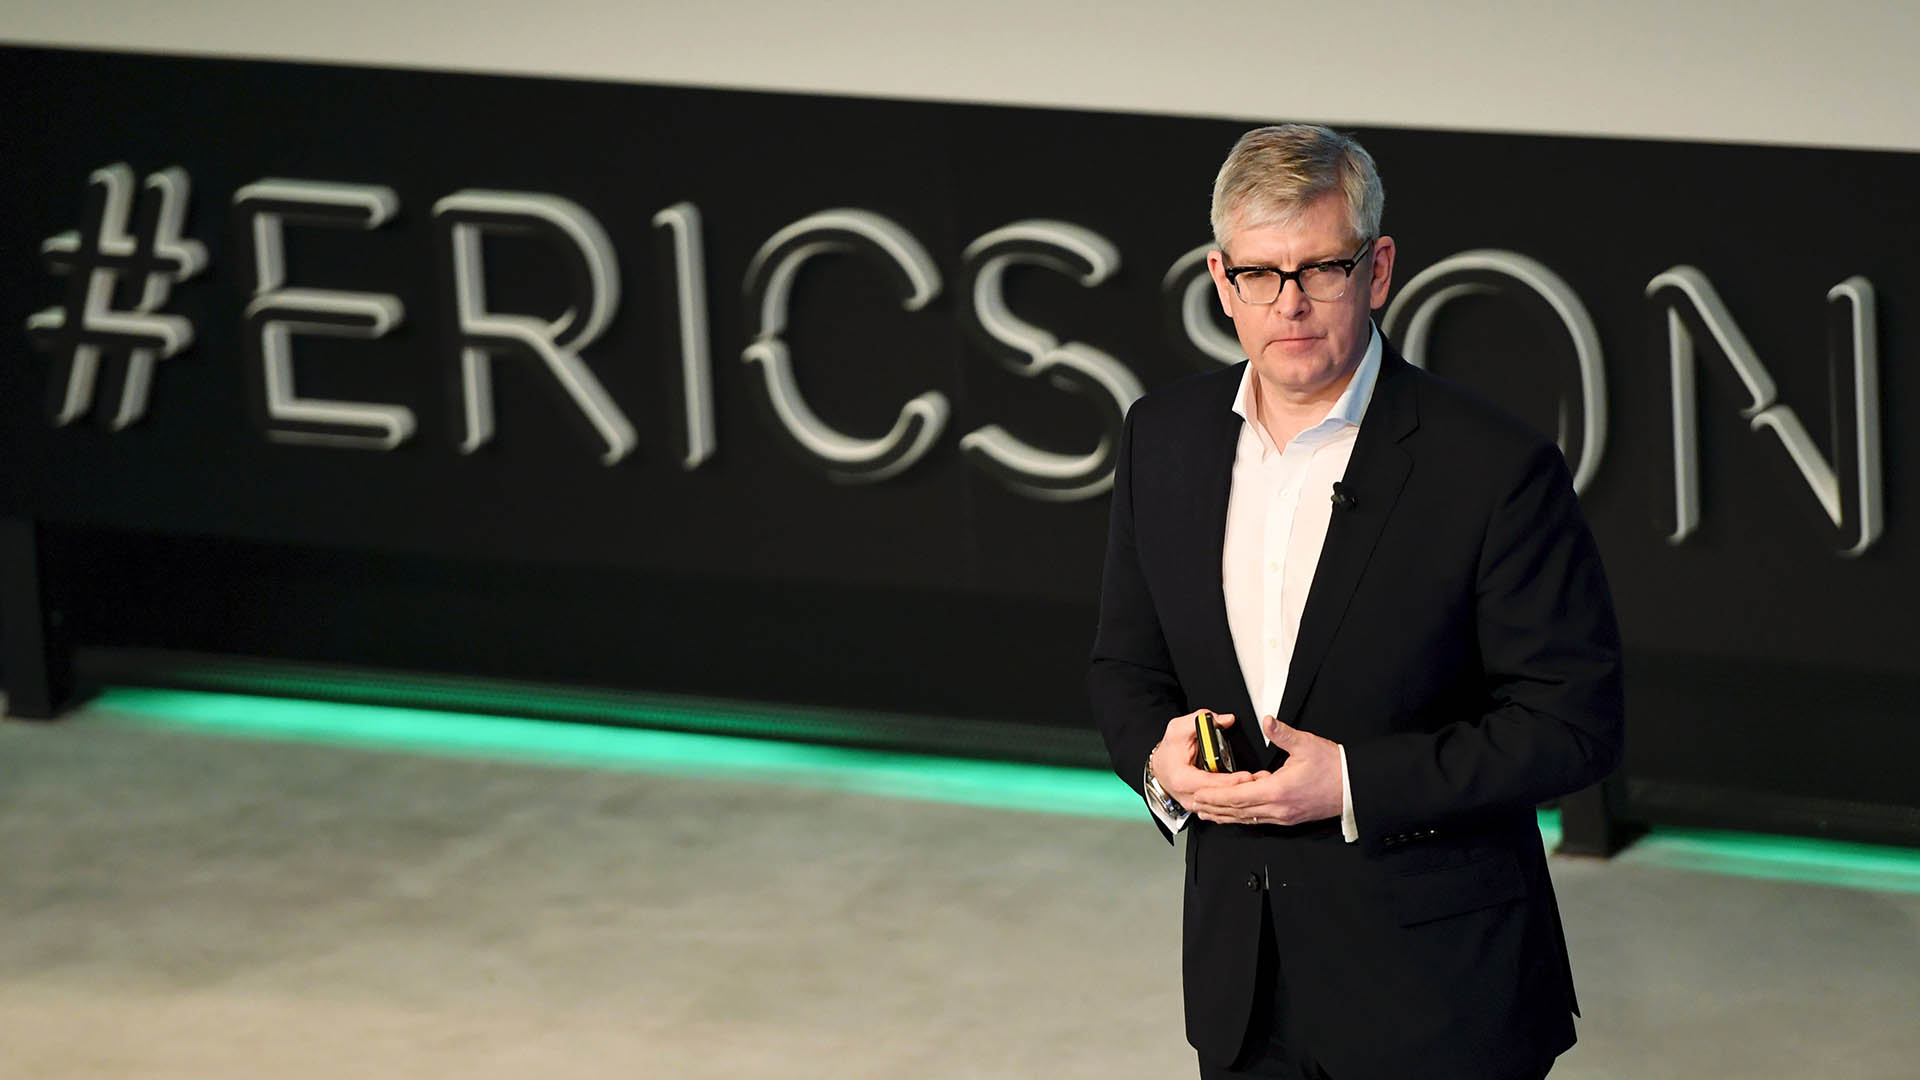 Photo of Ericsson CEO Borje Ekholm in front of an Ericsson sign